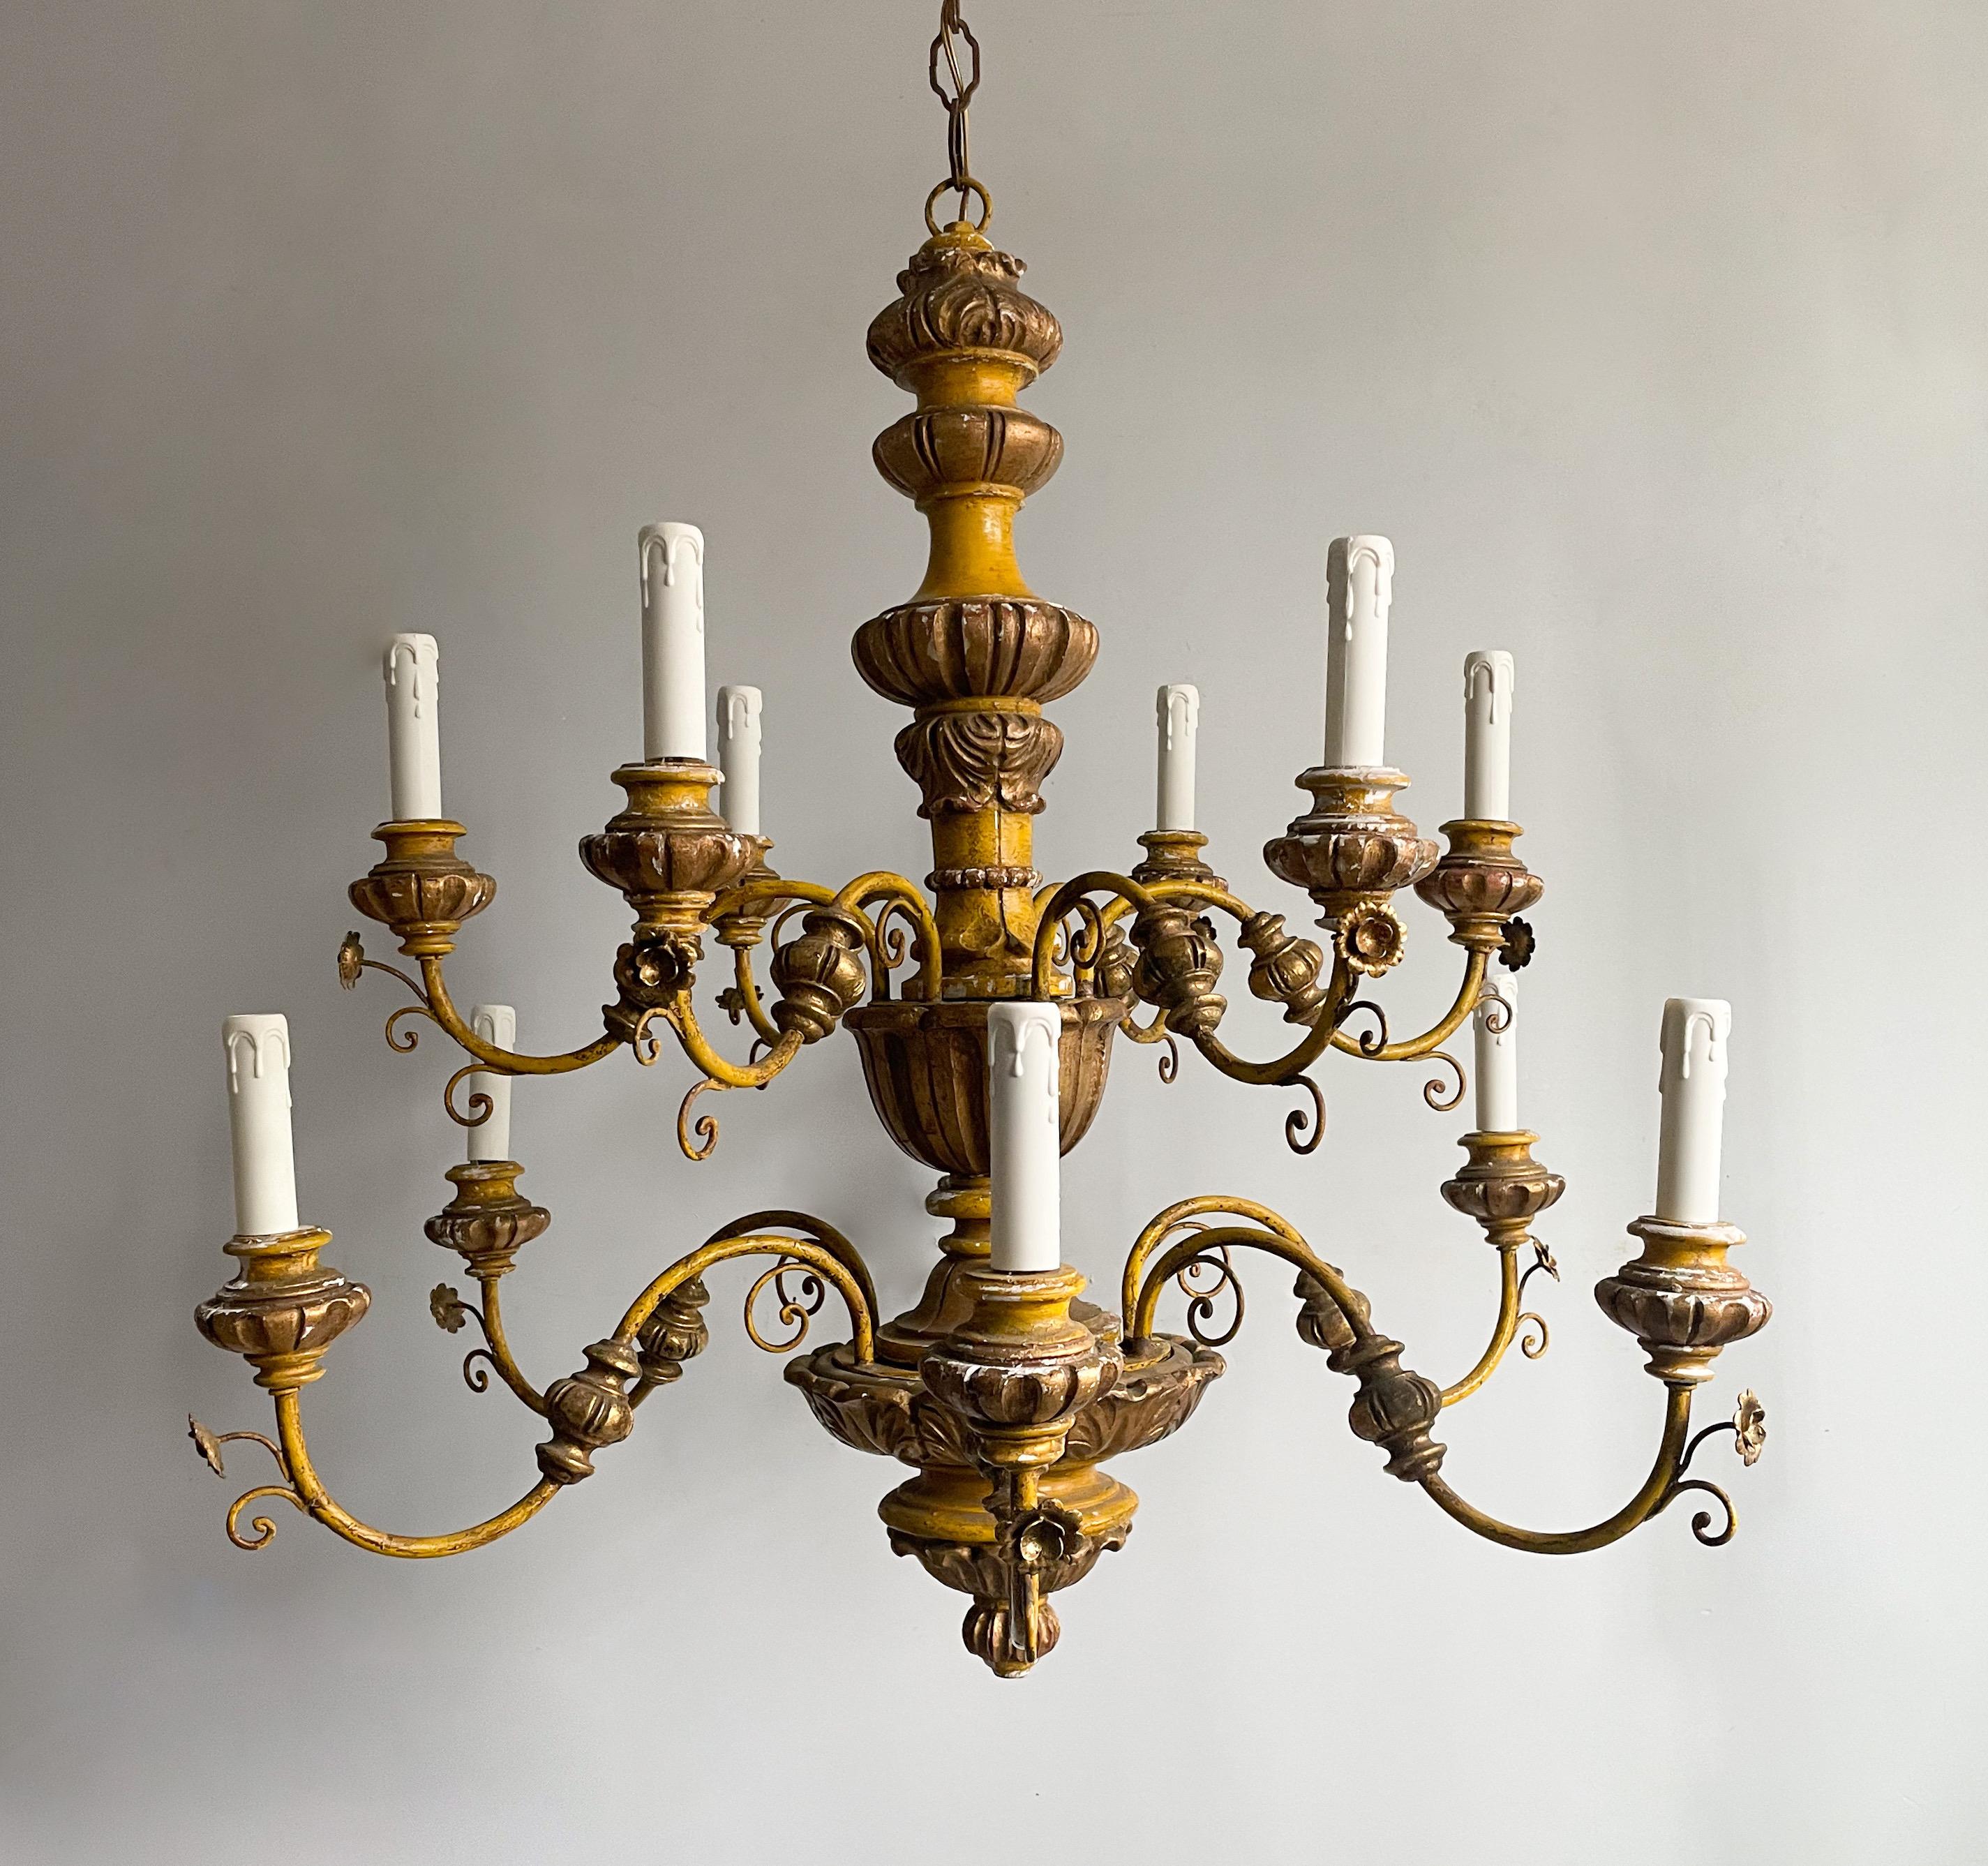 Gorgeous, Italian 1950s painted and parcel-gilt chandelier imported by Feldman Lighting, Los Angeles.

The chandelier consists of a two-tier wrought iron and carved wood frame painted in a rich yellow finish with gilded accents.

Paint finish is